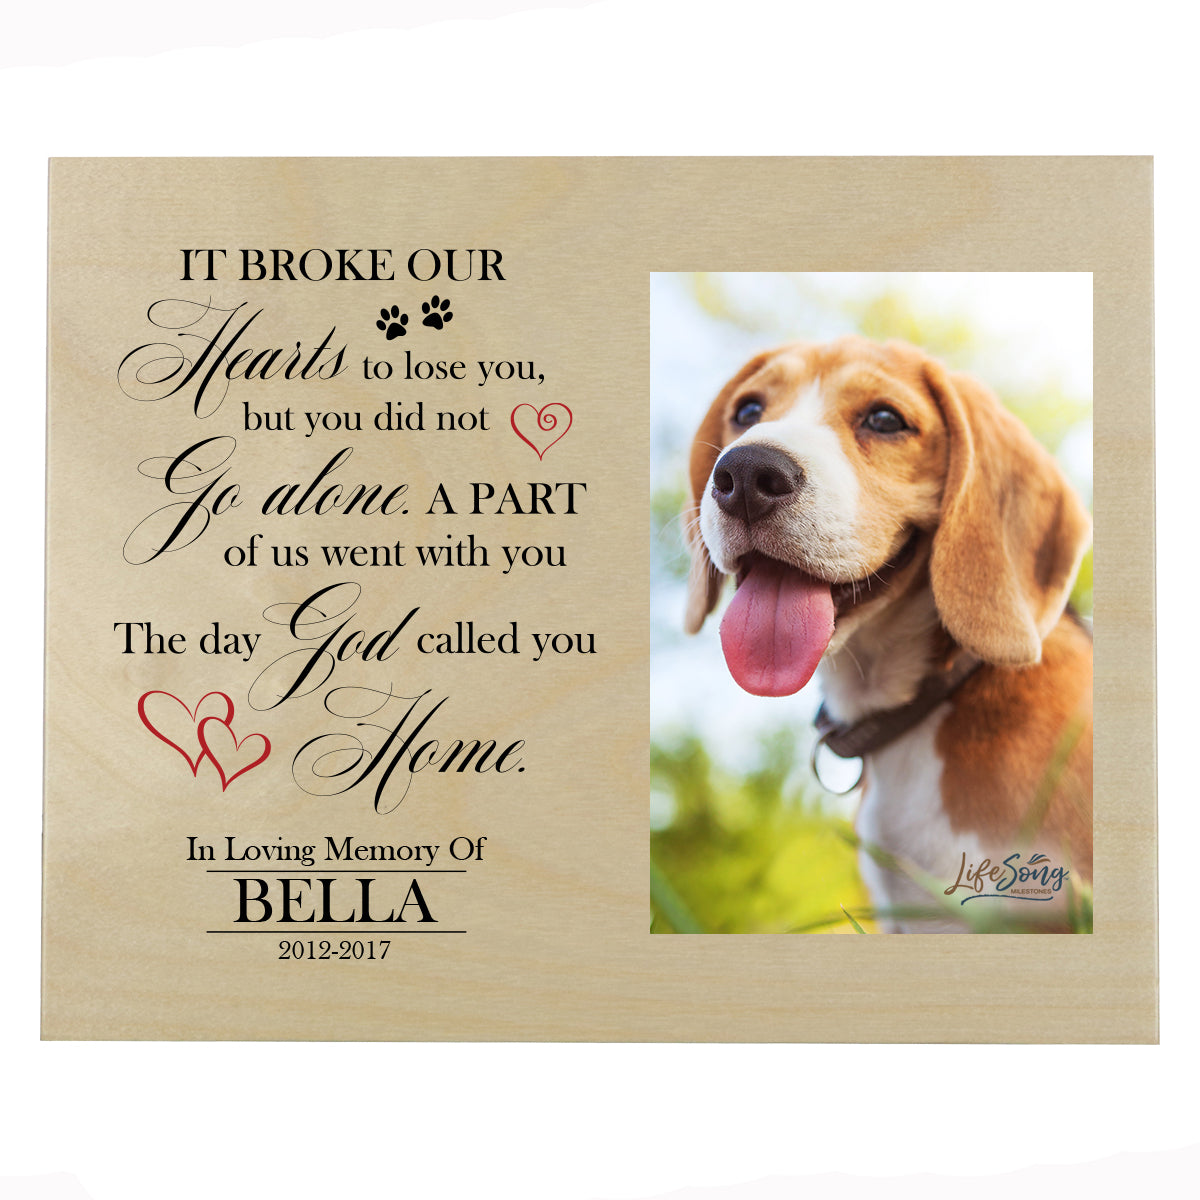 Pet Memorial Photo Wall Plaque Décor - It Broke Our Hearts To Lose You